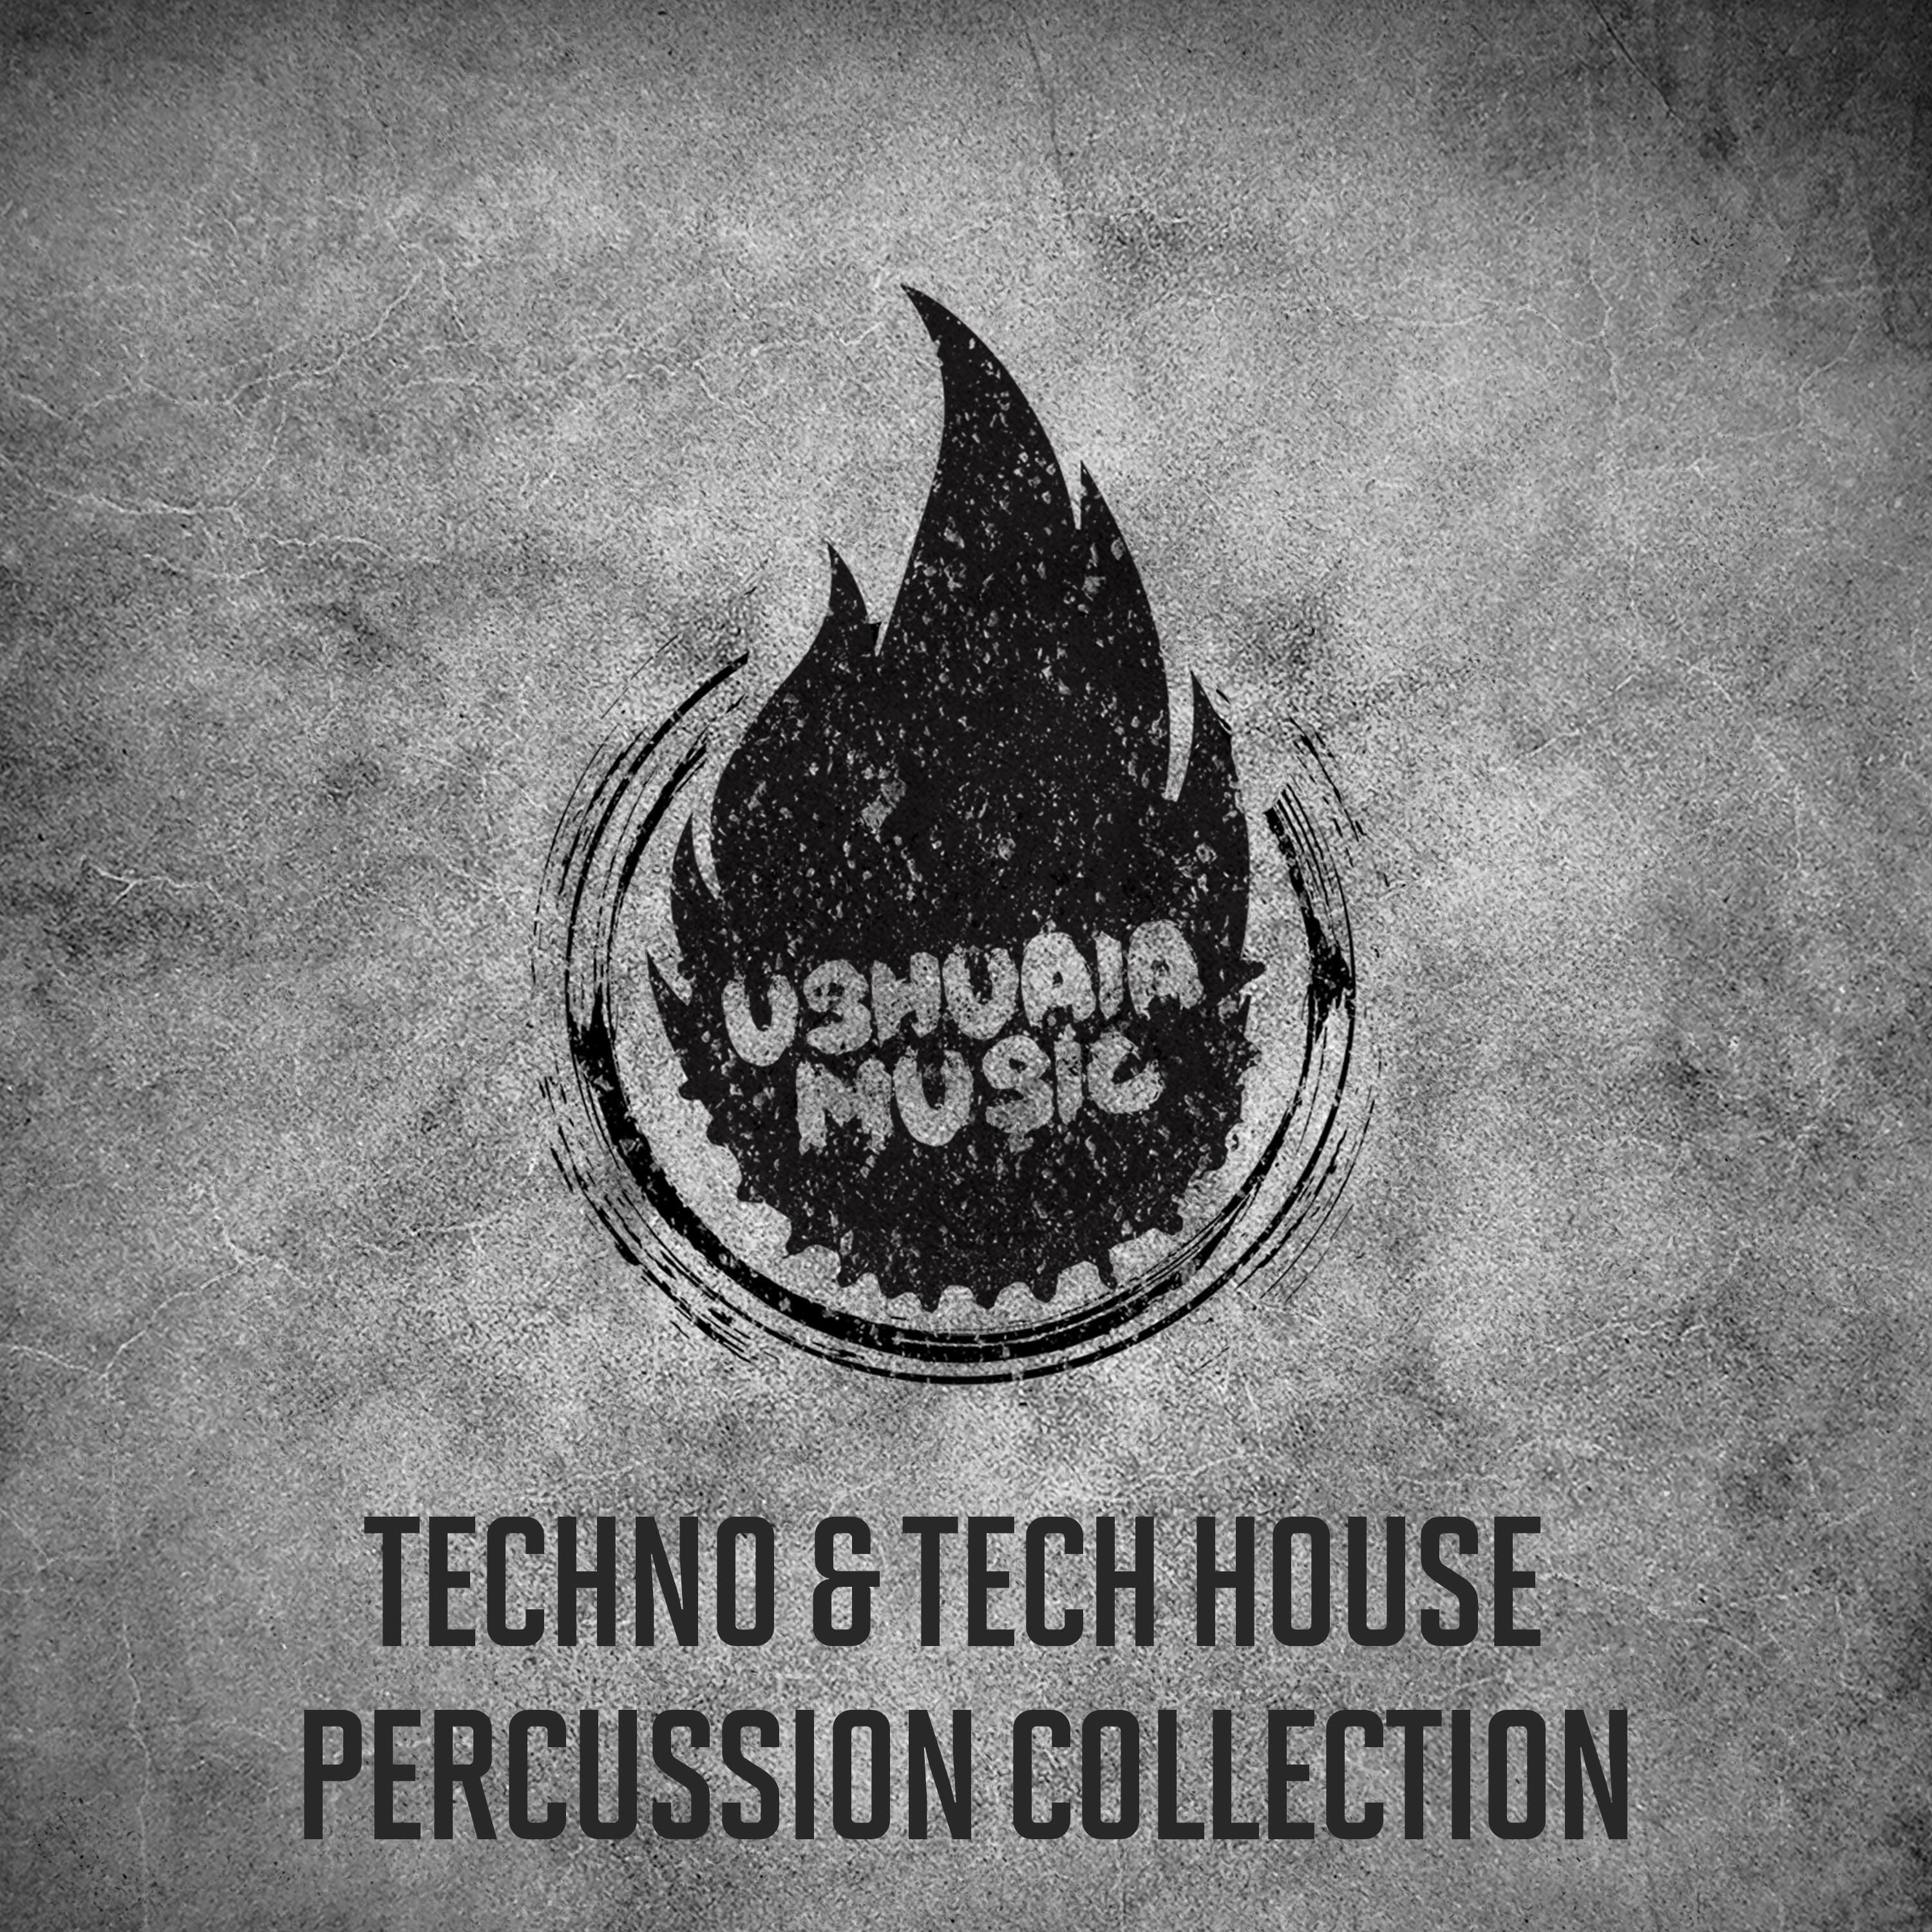 Techno & Tech House Percussion Collection Sample Pack Ushuaia Music